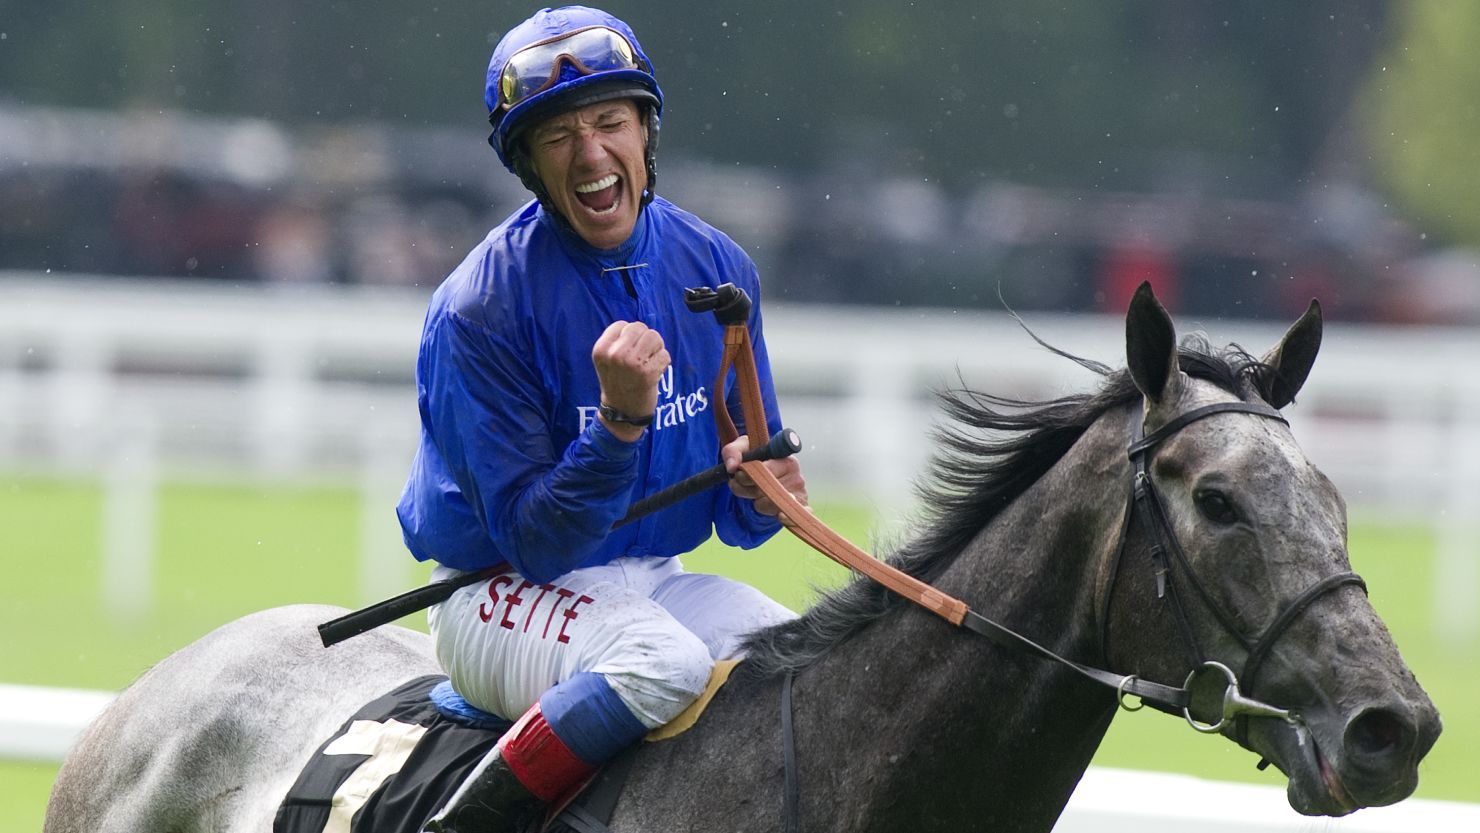 Frankie Dettori is facing an investigation after a positive test at a meeting at Longchamps in September